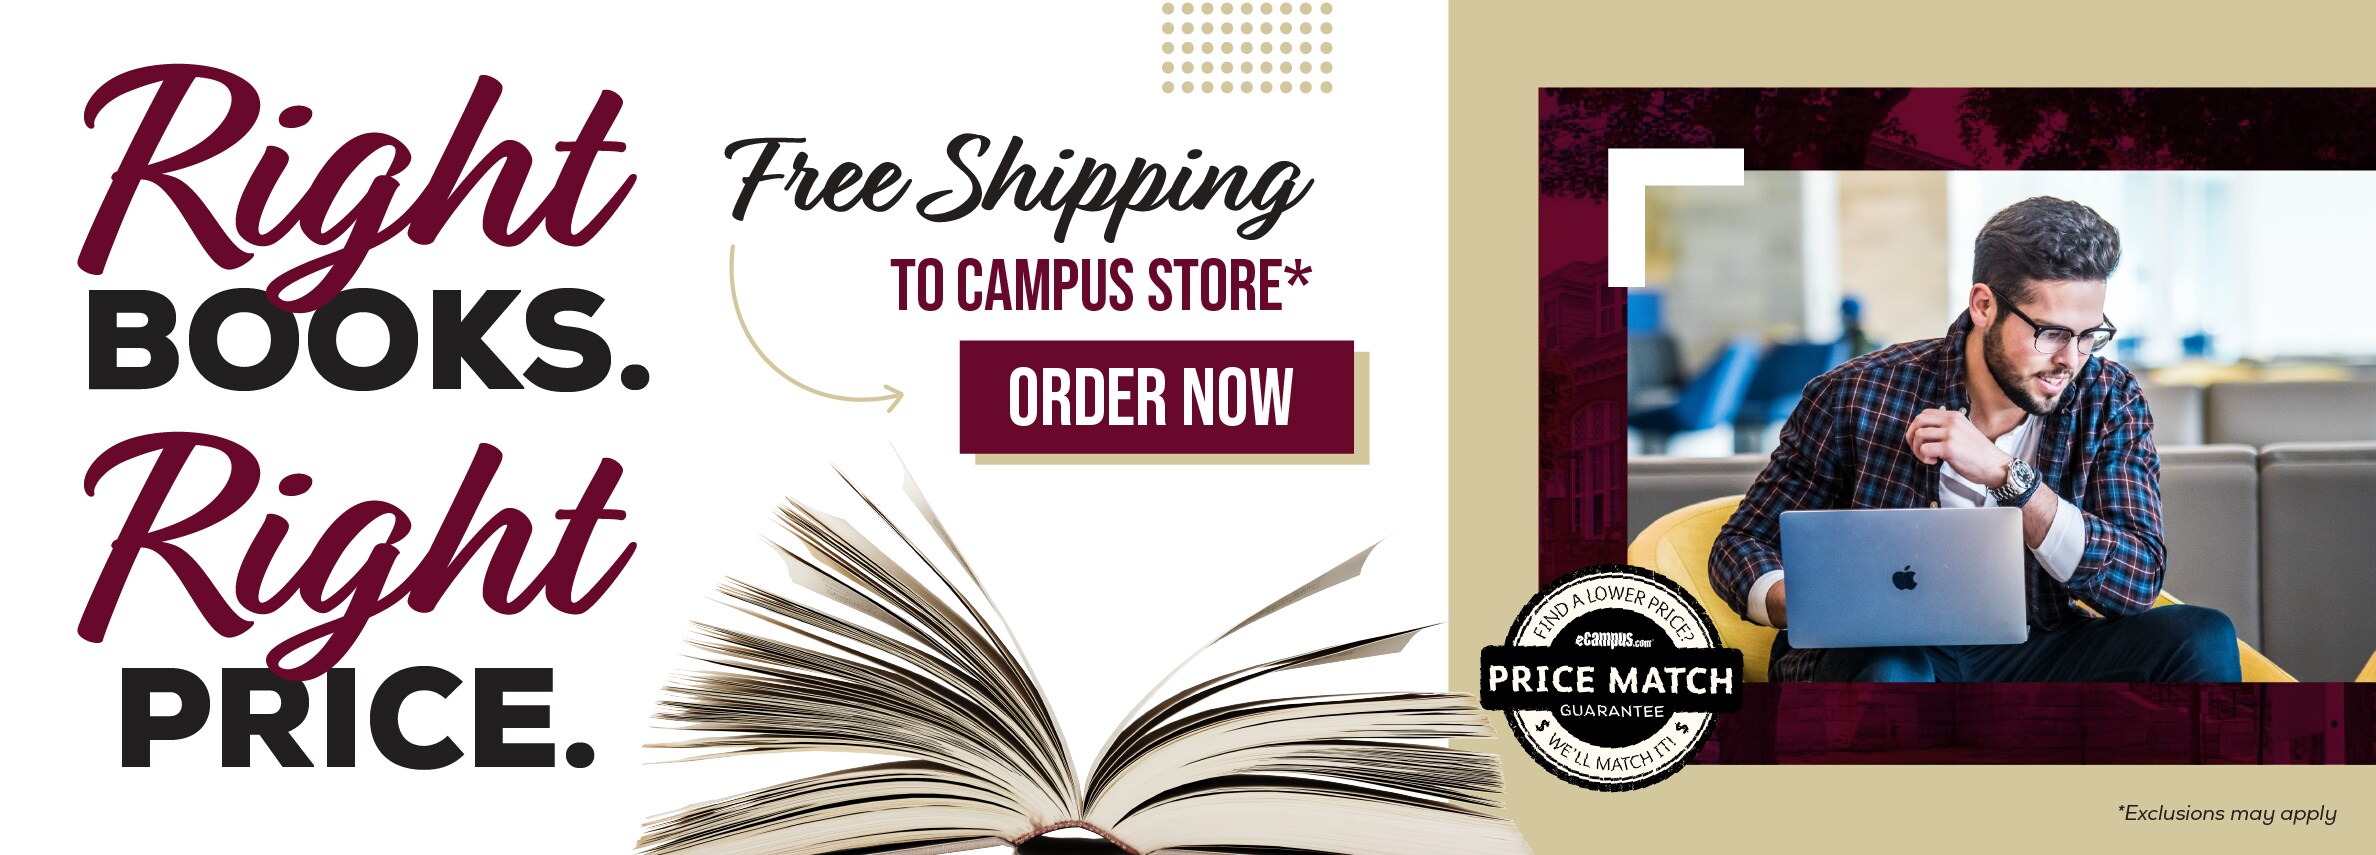 Right books. Right price. Free shipping to campus store.* Order now. Price Match Guarantee. *Exclusions may apply.